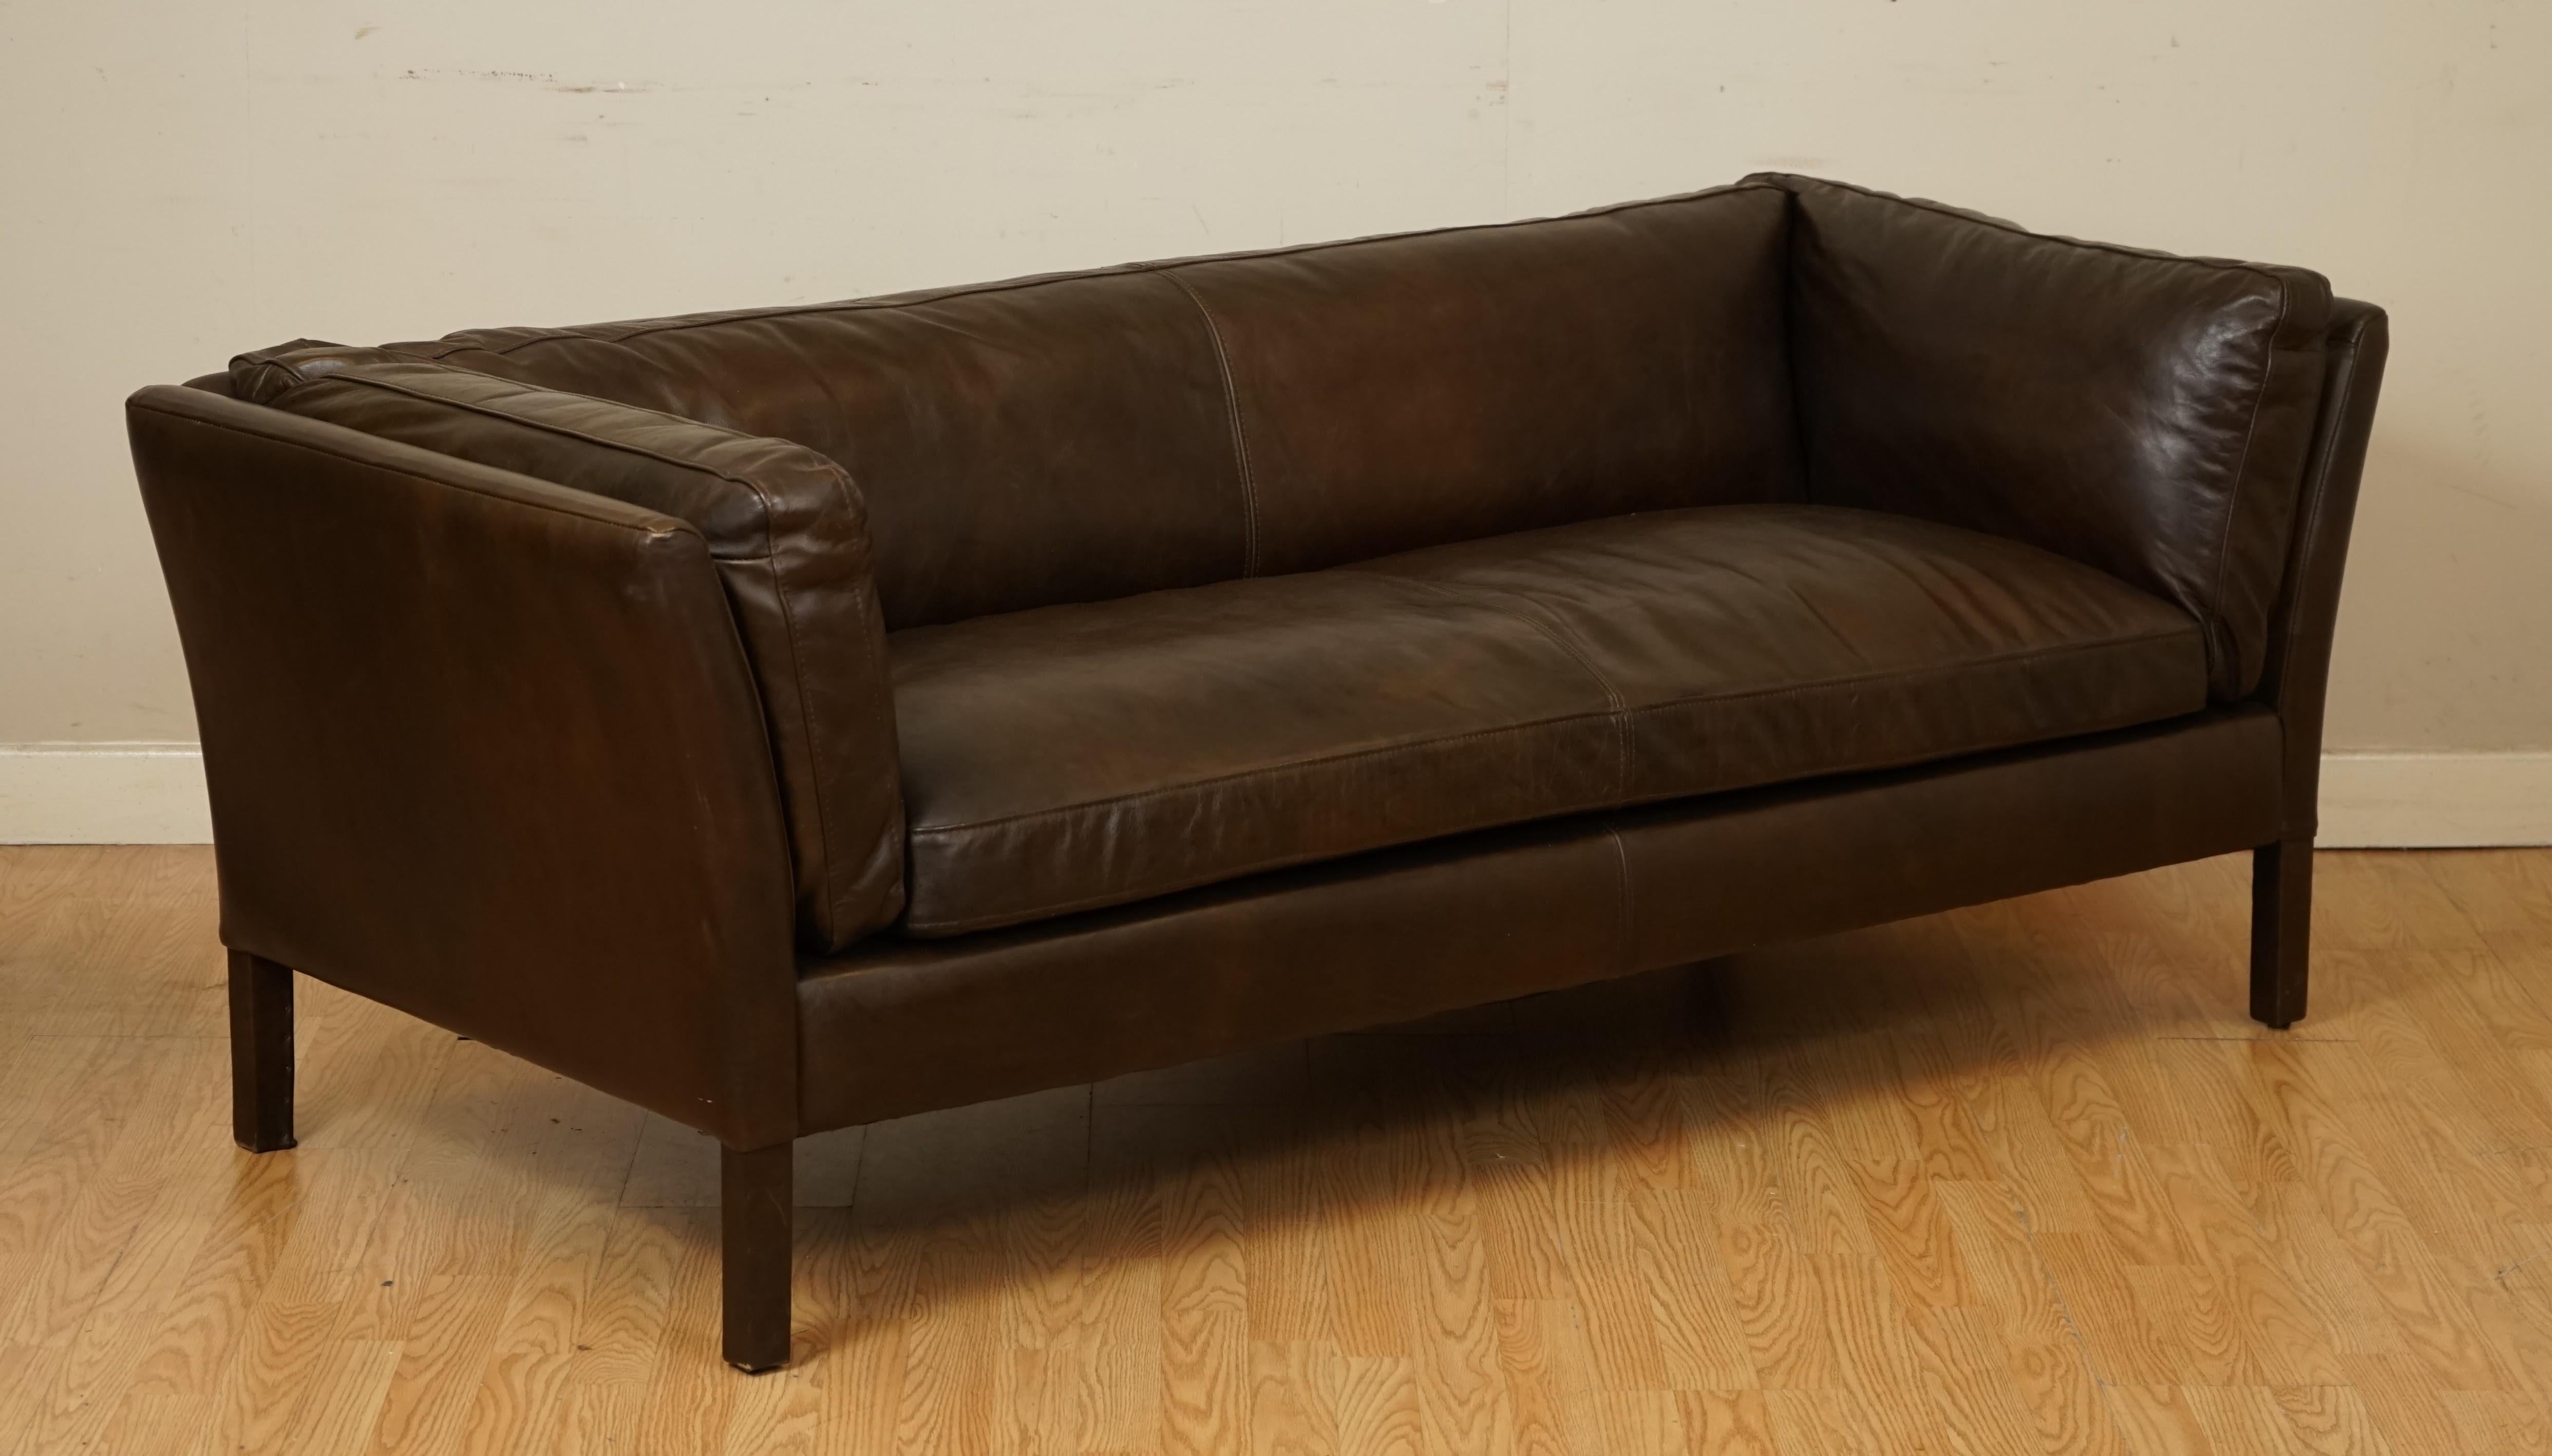 We are so excited to present to you this Pair of Halo Groucho Sofa in Biker Tan Colour.

This pair are in an almost like new condition, the leather is in a very good condition and the cushions are still nice and plump.

The seating and cushions